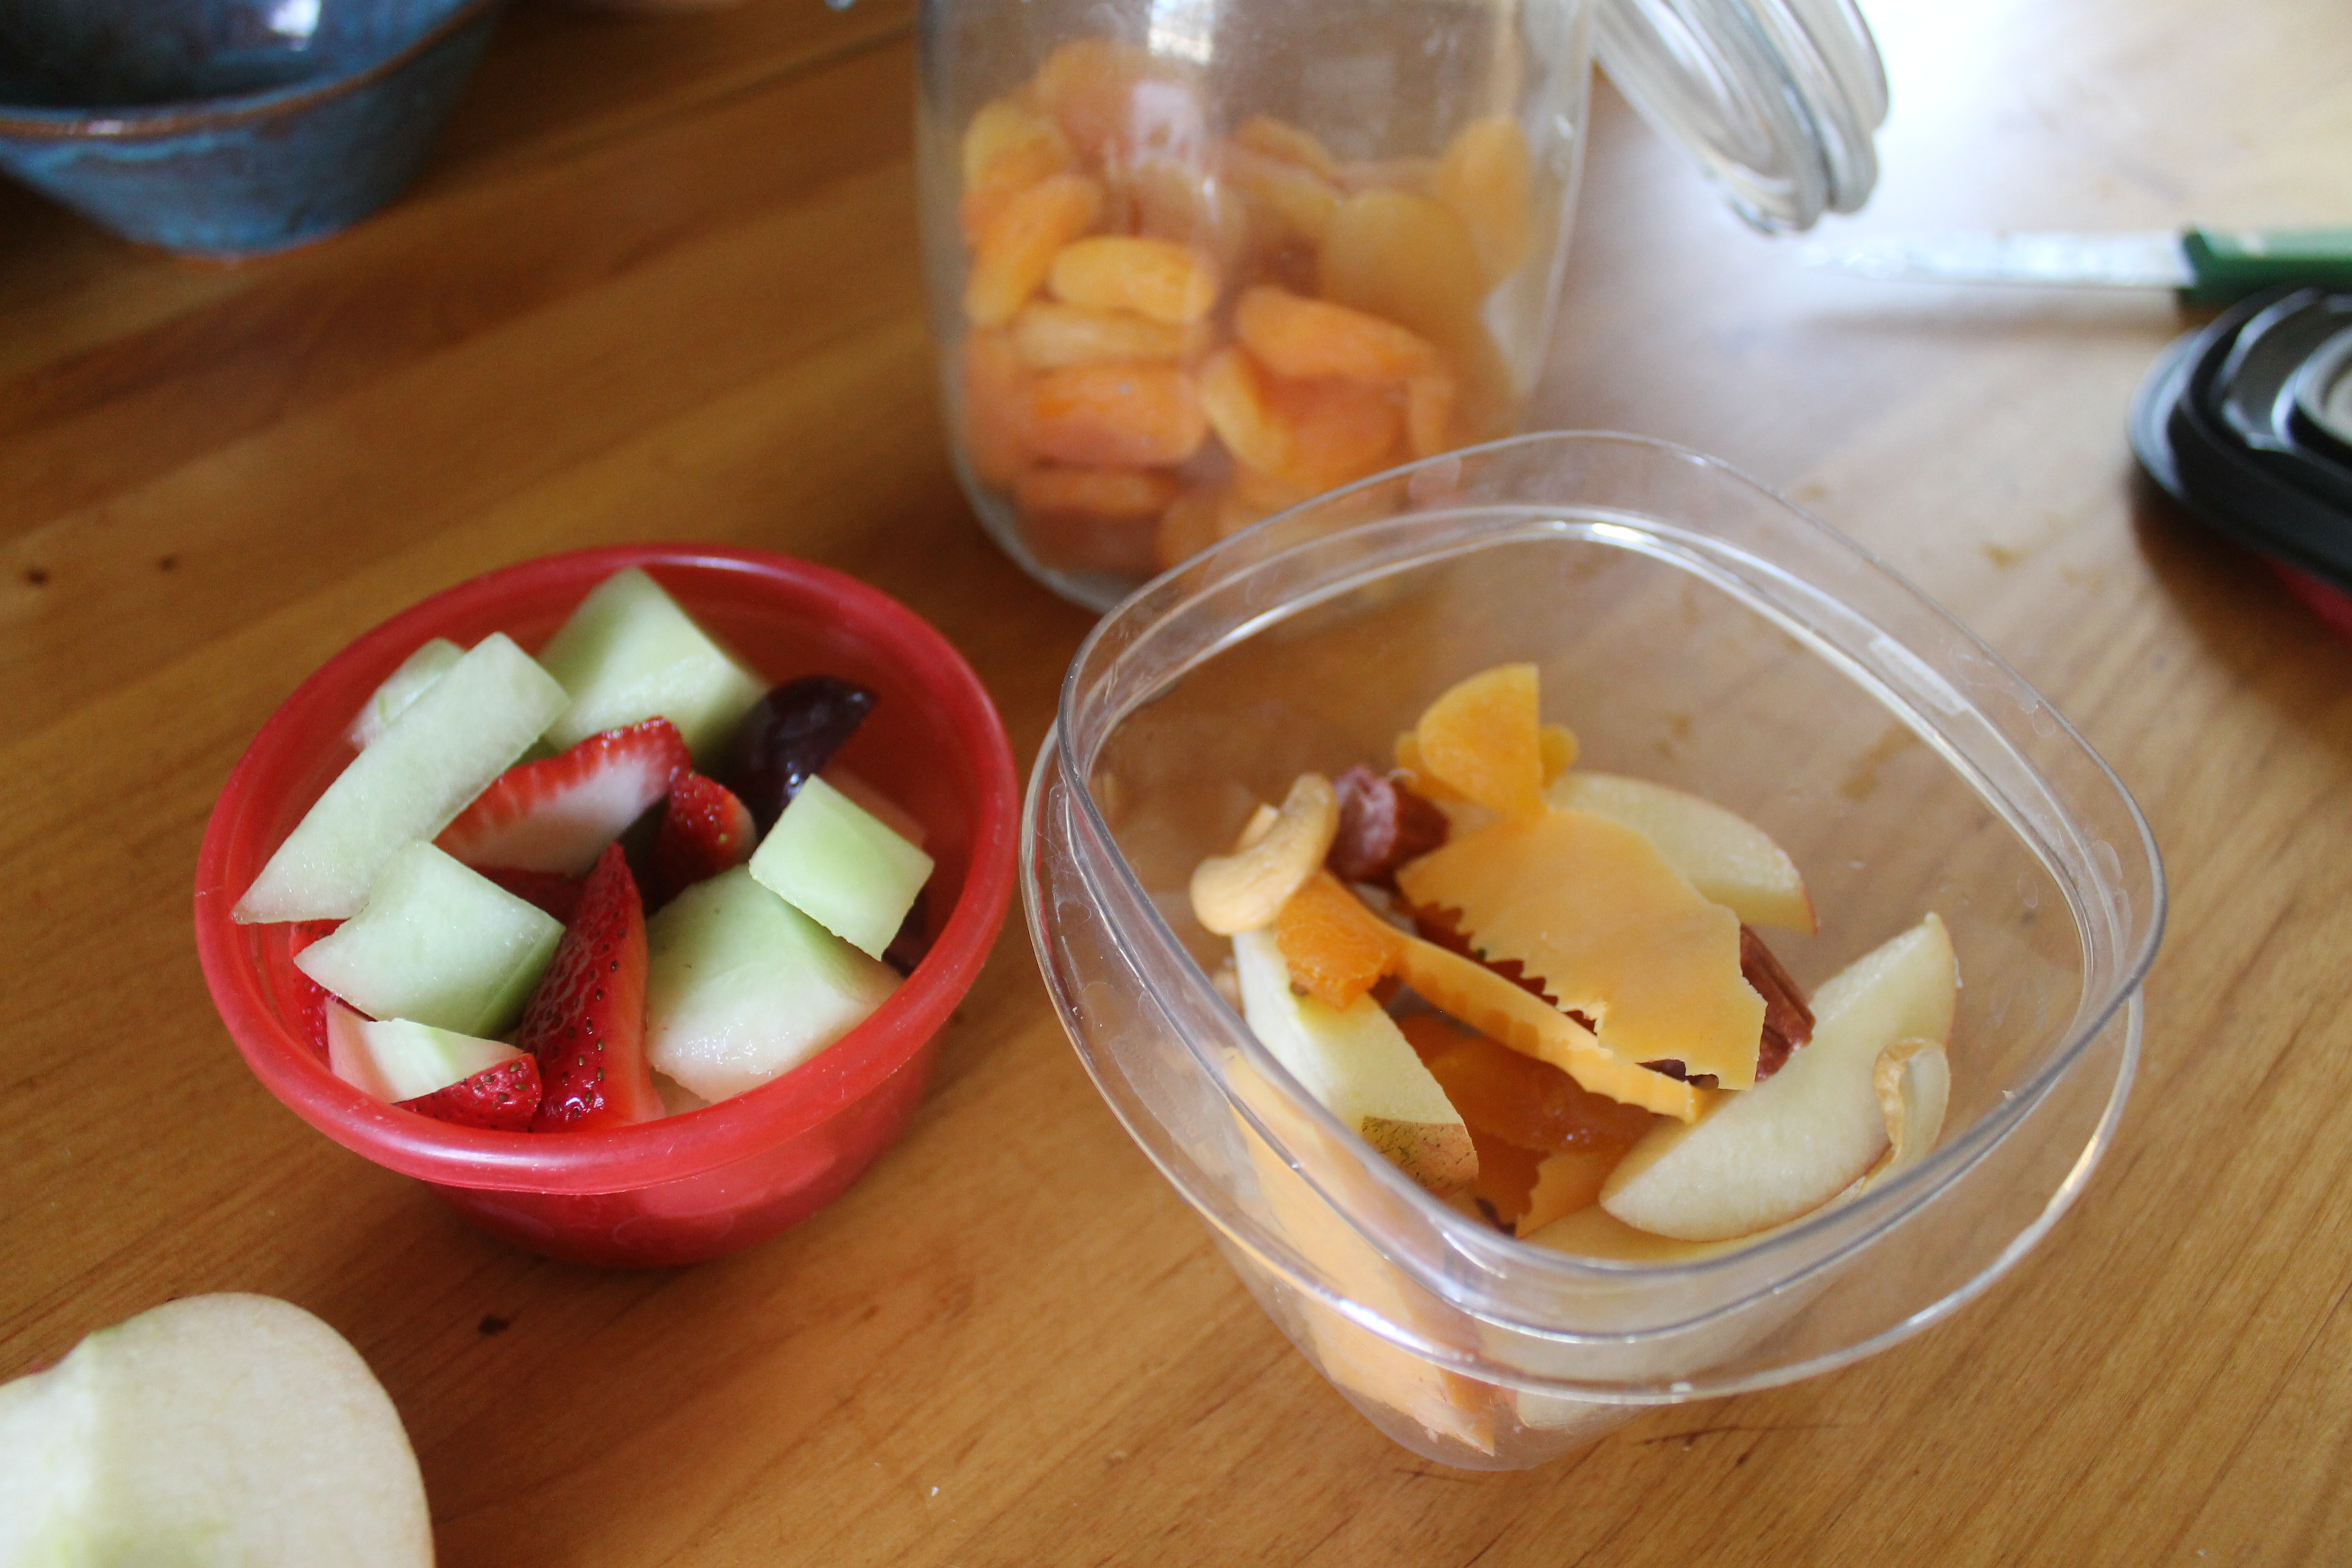 Healthy Kid's Snack Packs To Go